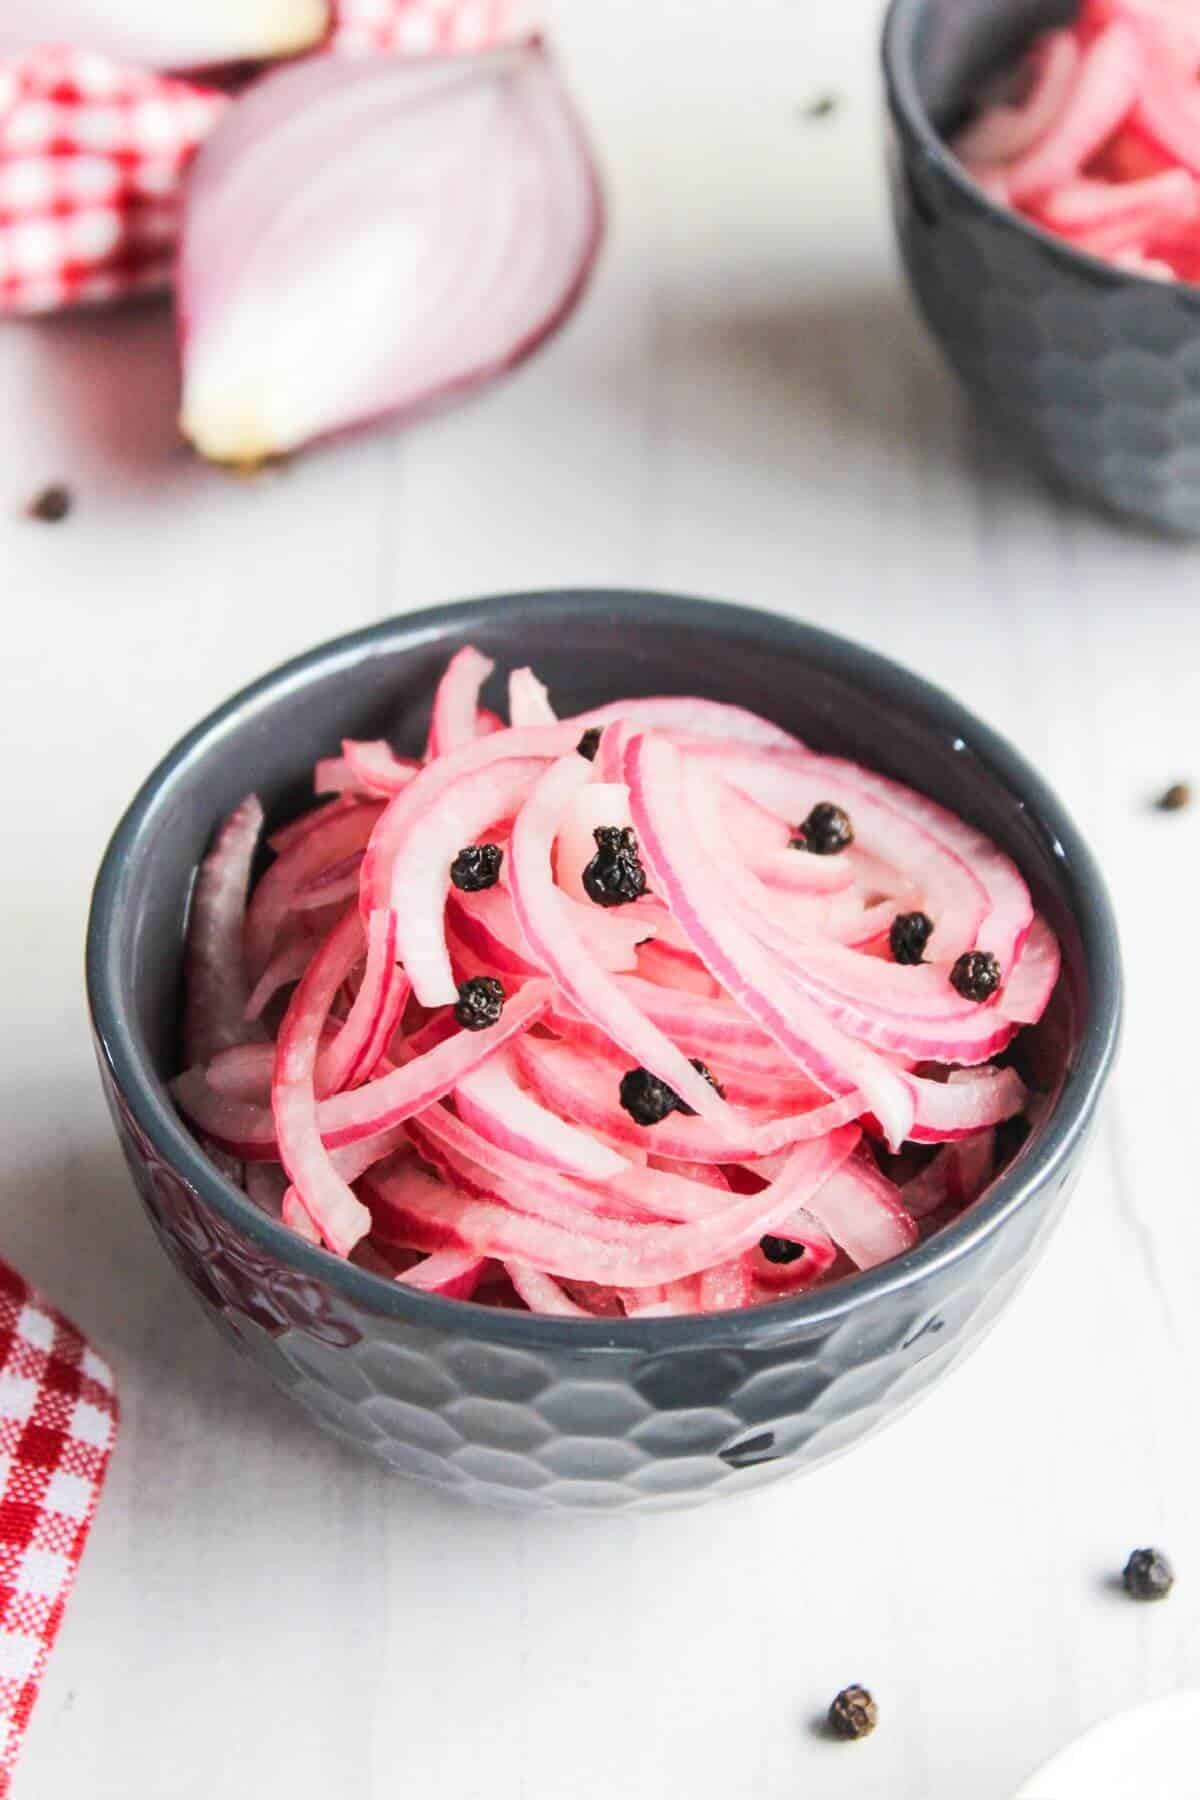 A bowl of sliced pickled red onions.